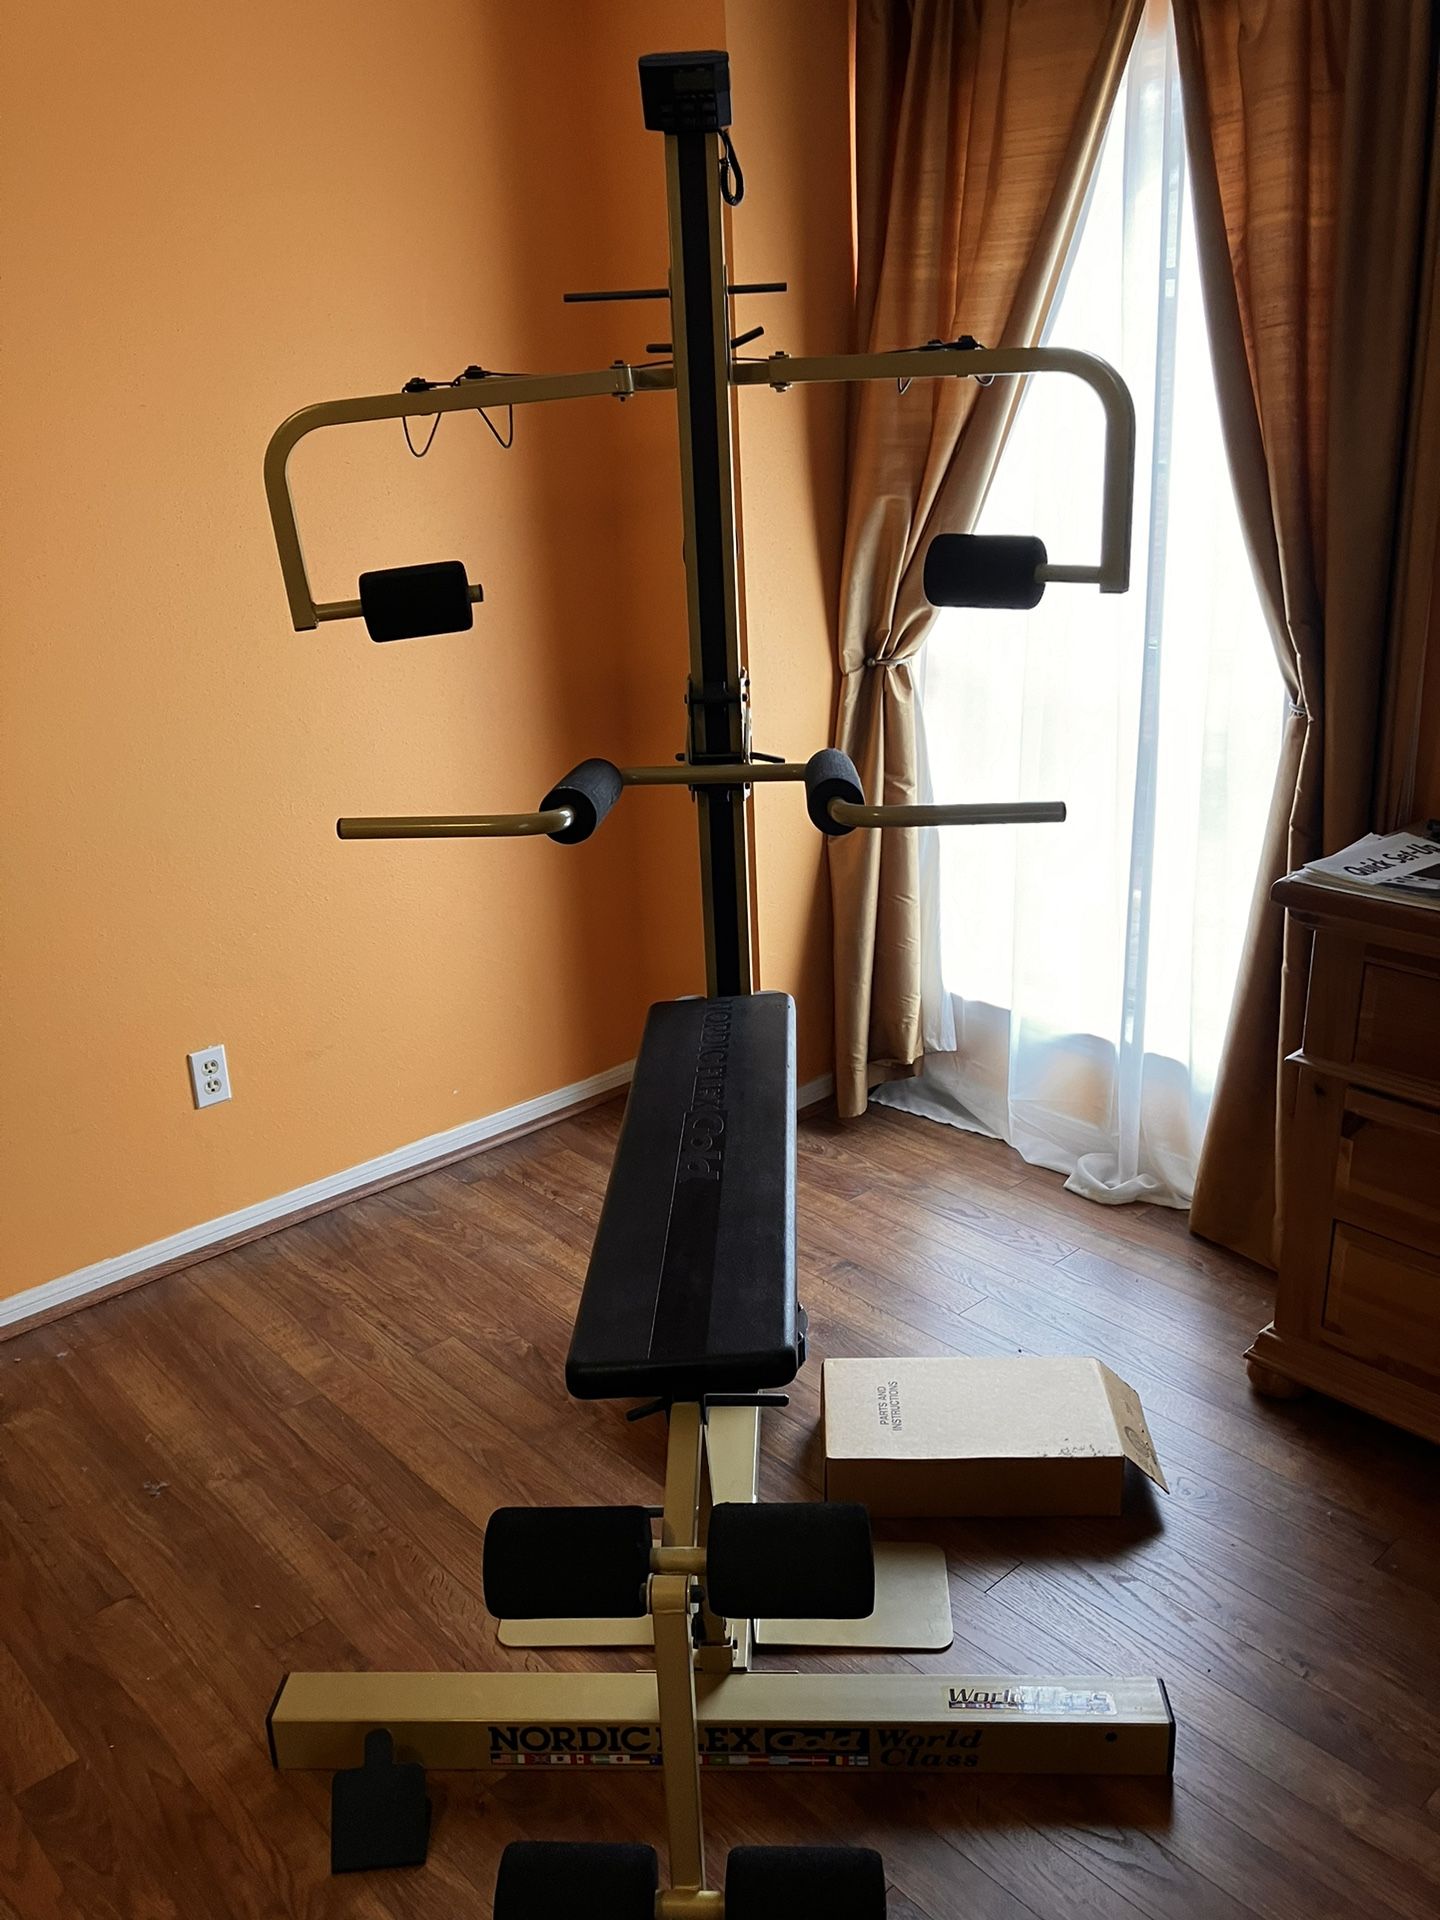 Nordic Flex Gold - NordicTrack Home Gym with All Attachments